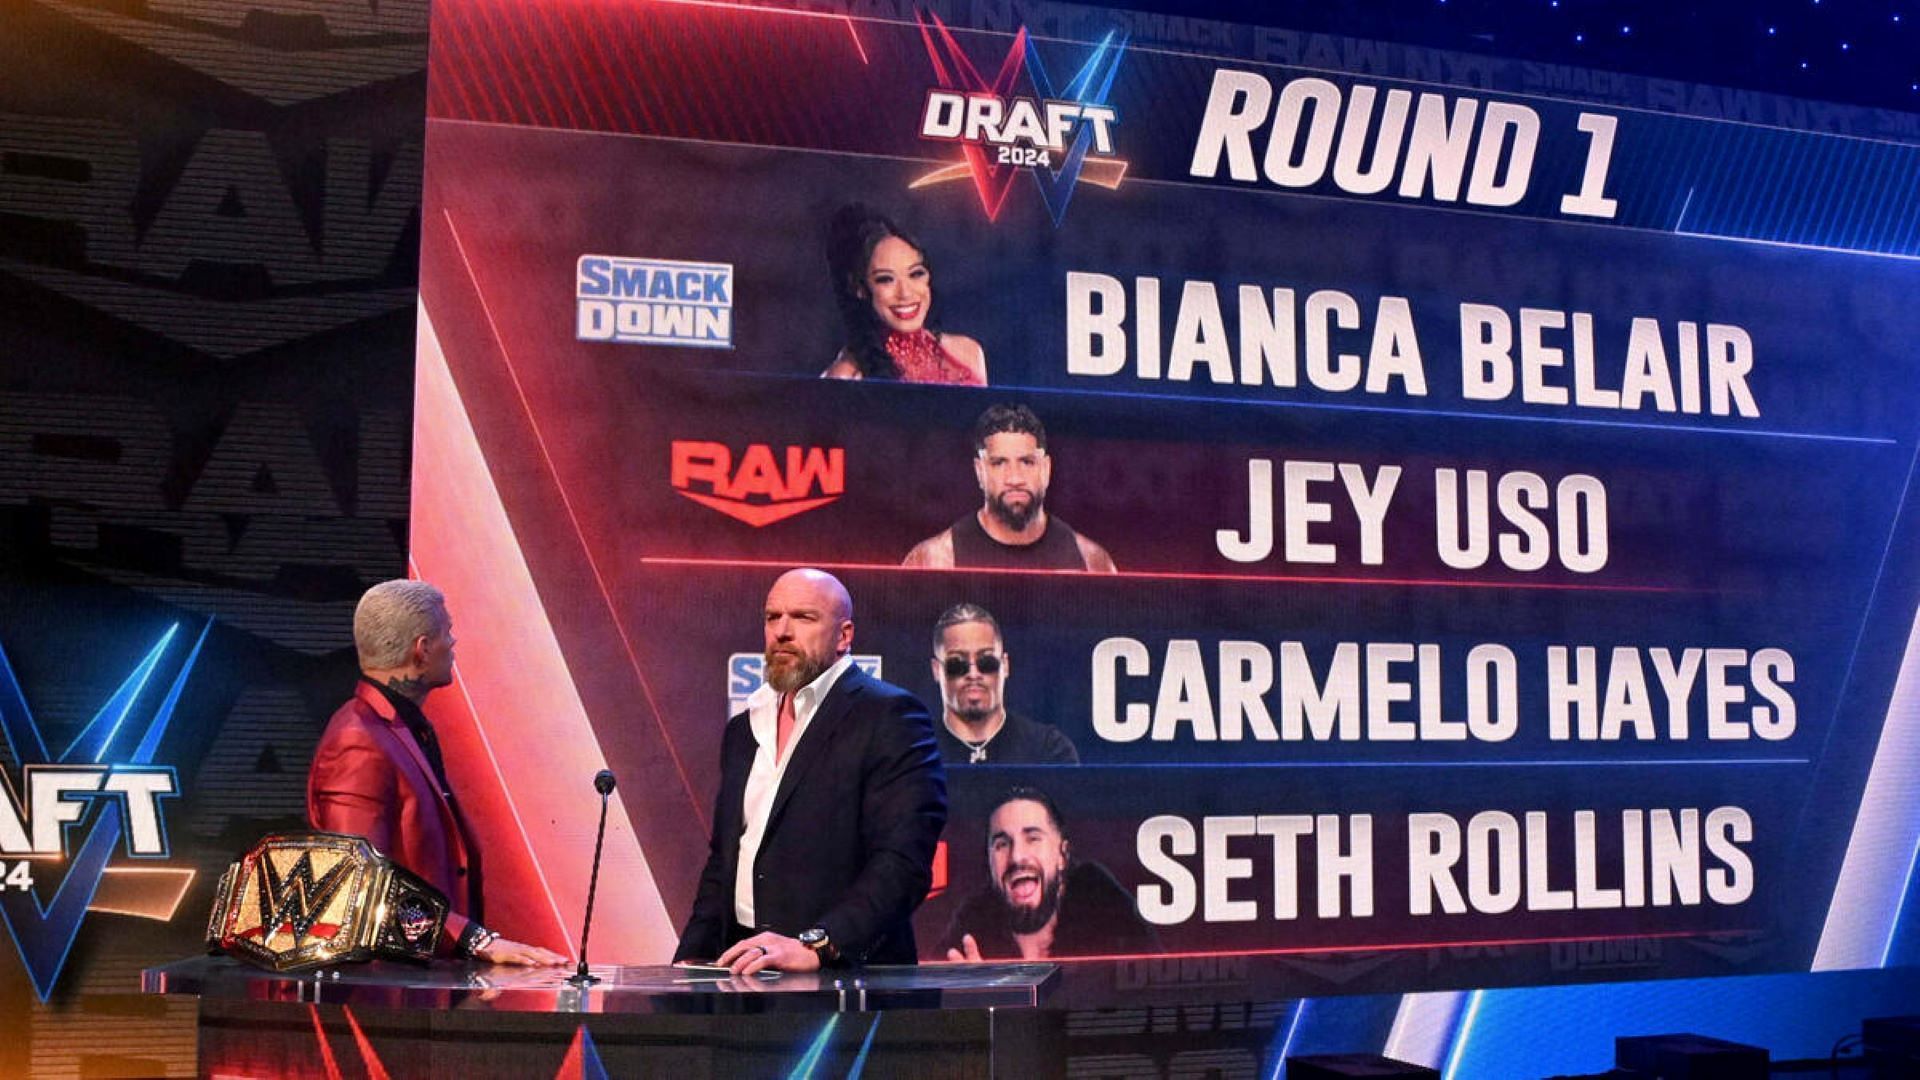 Cody Rhodes opened and closed Night 1 of the Draft.